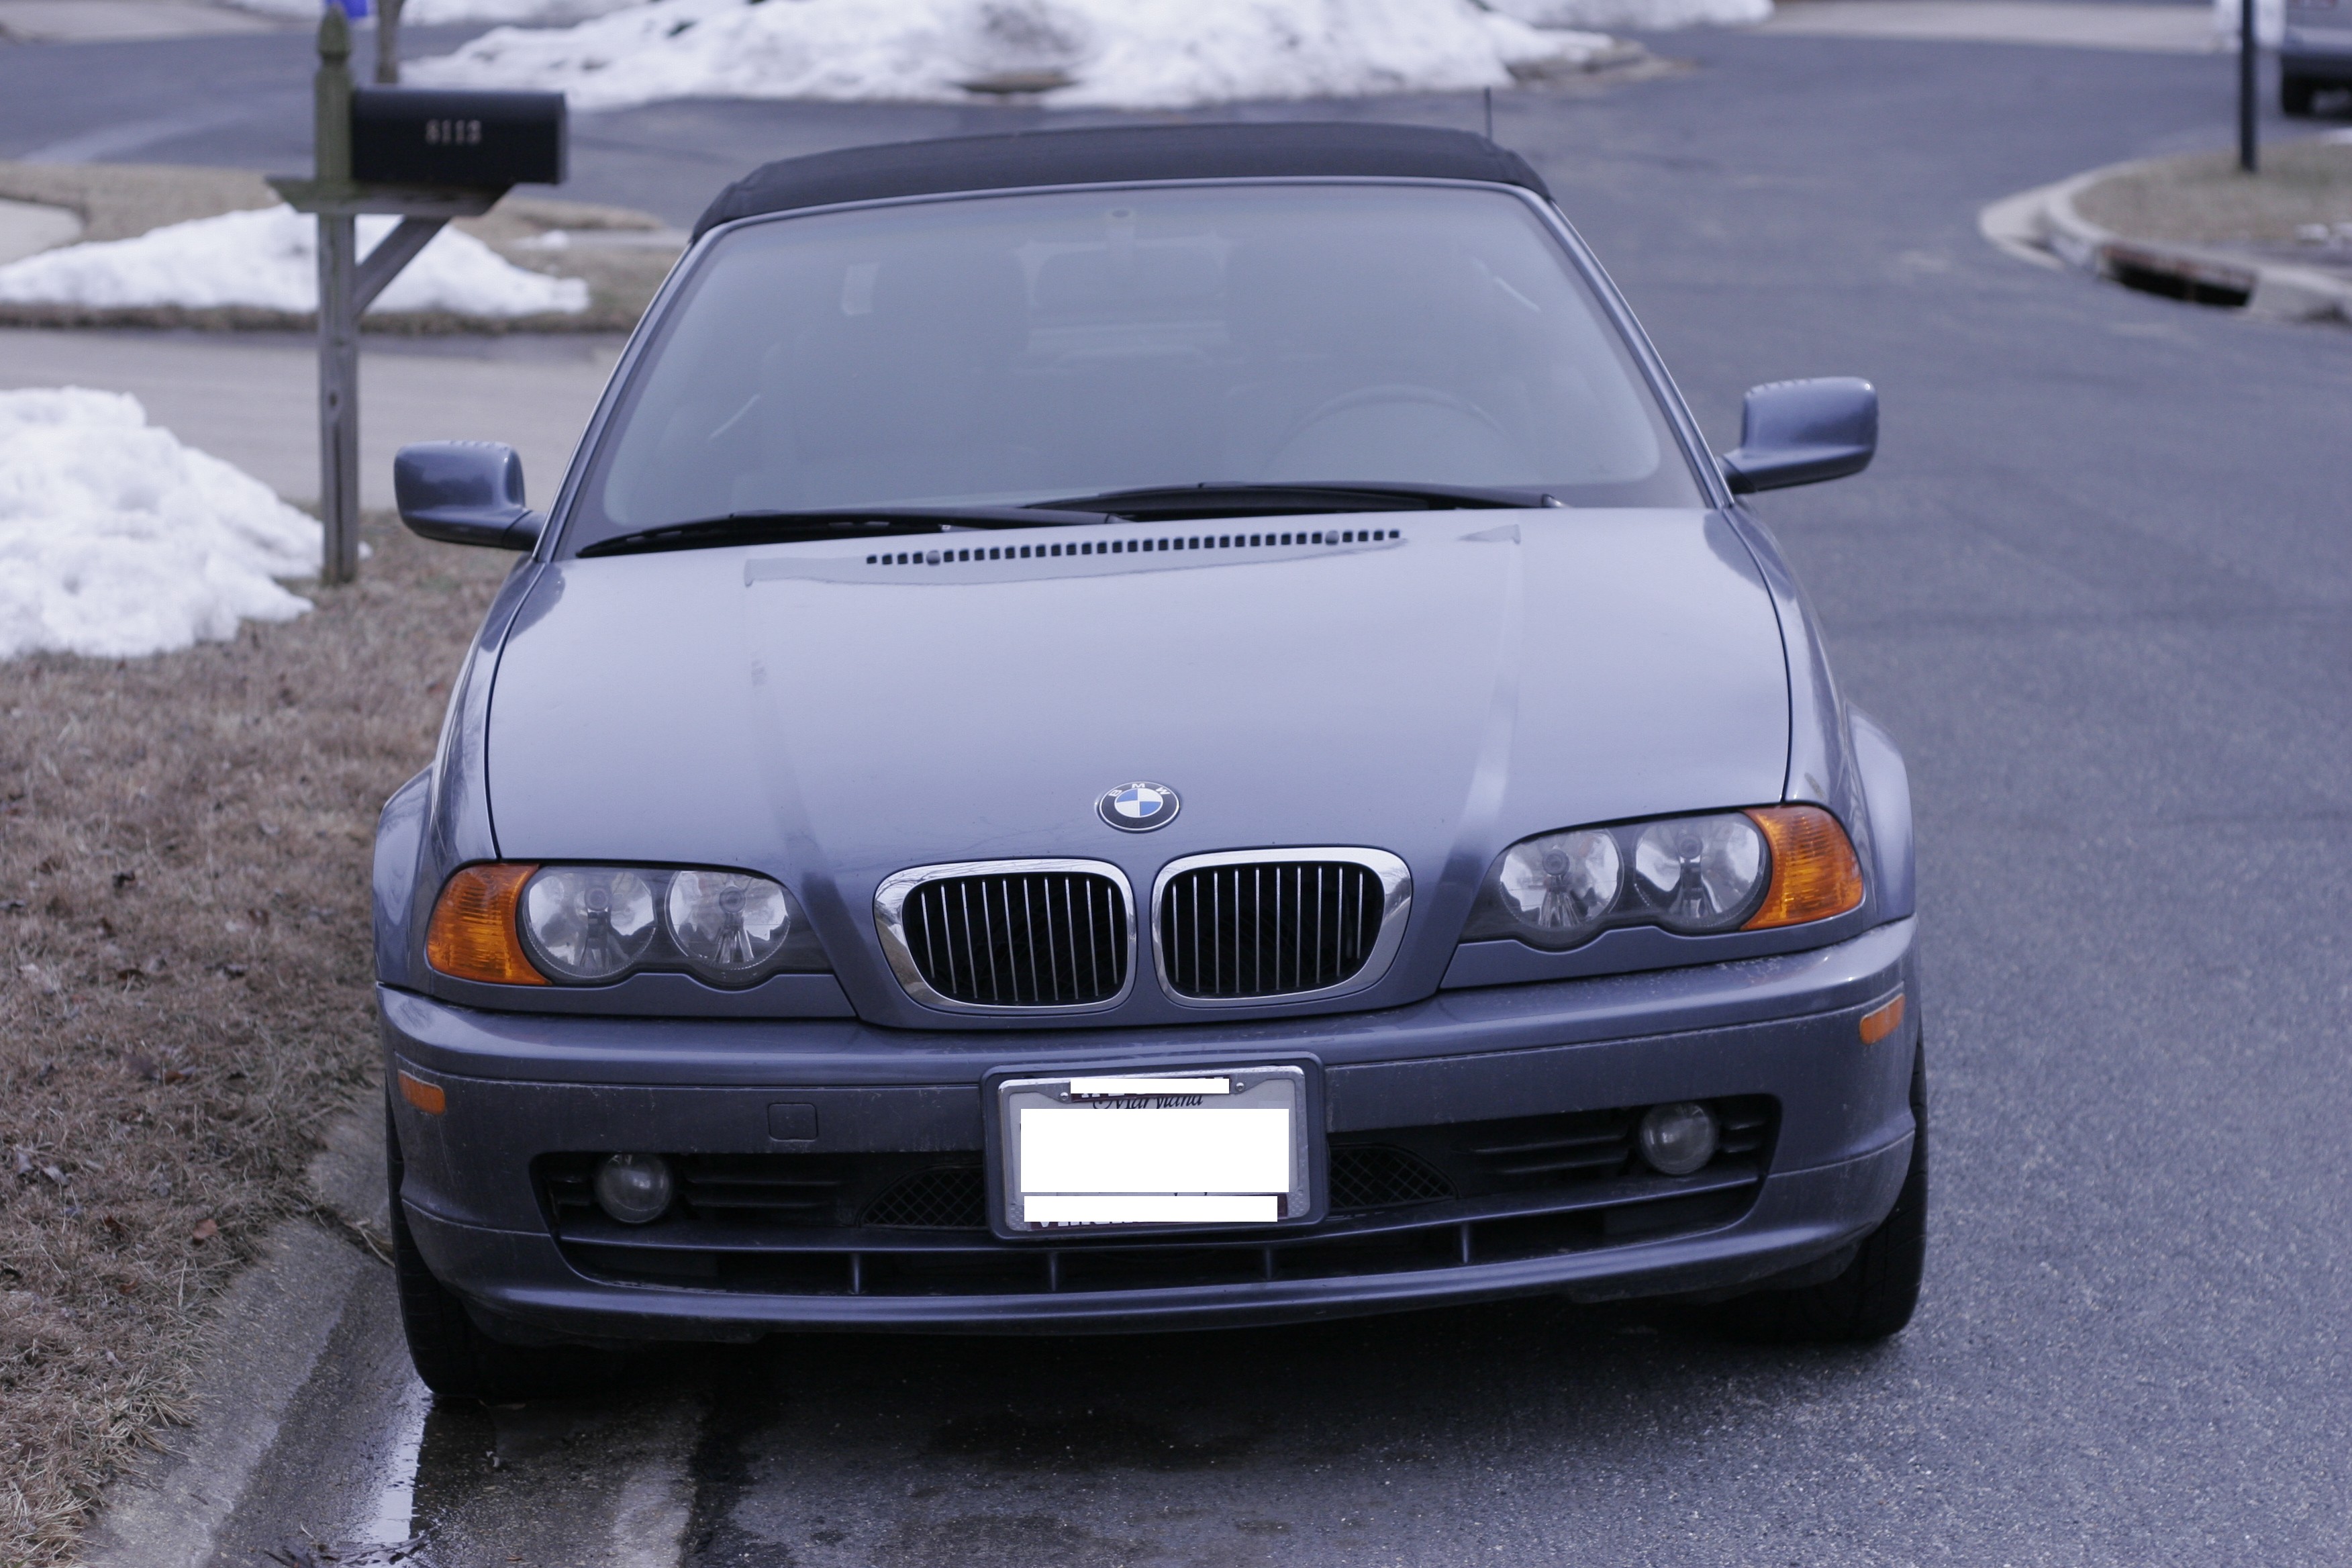 2000 BMW 323ci front | Flickr - Photo Sharing!